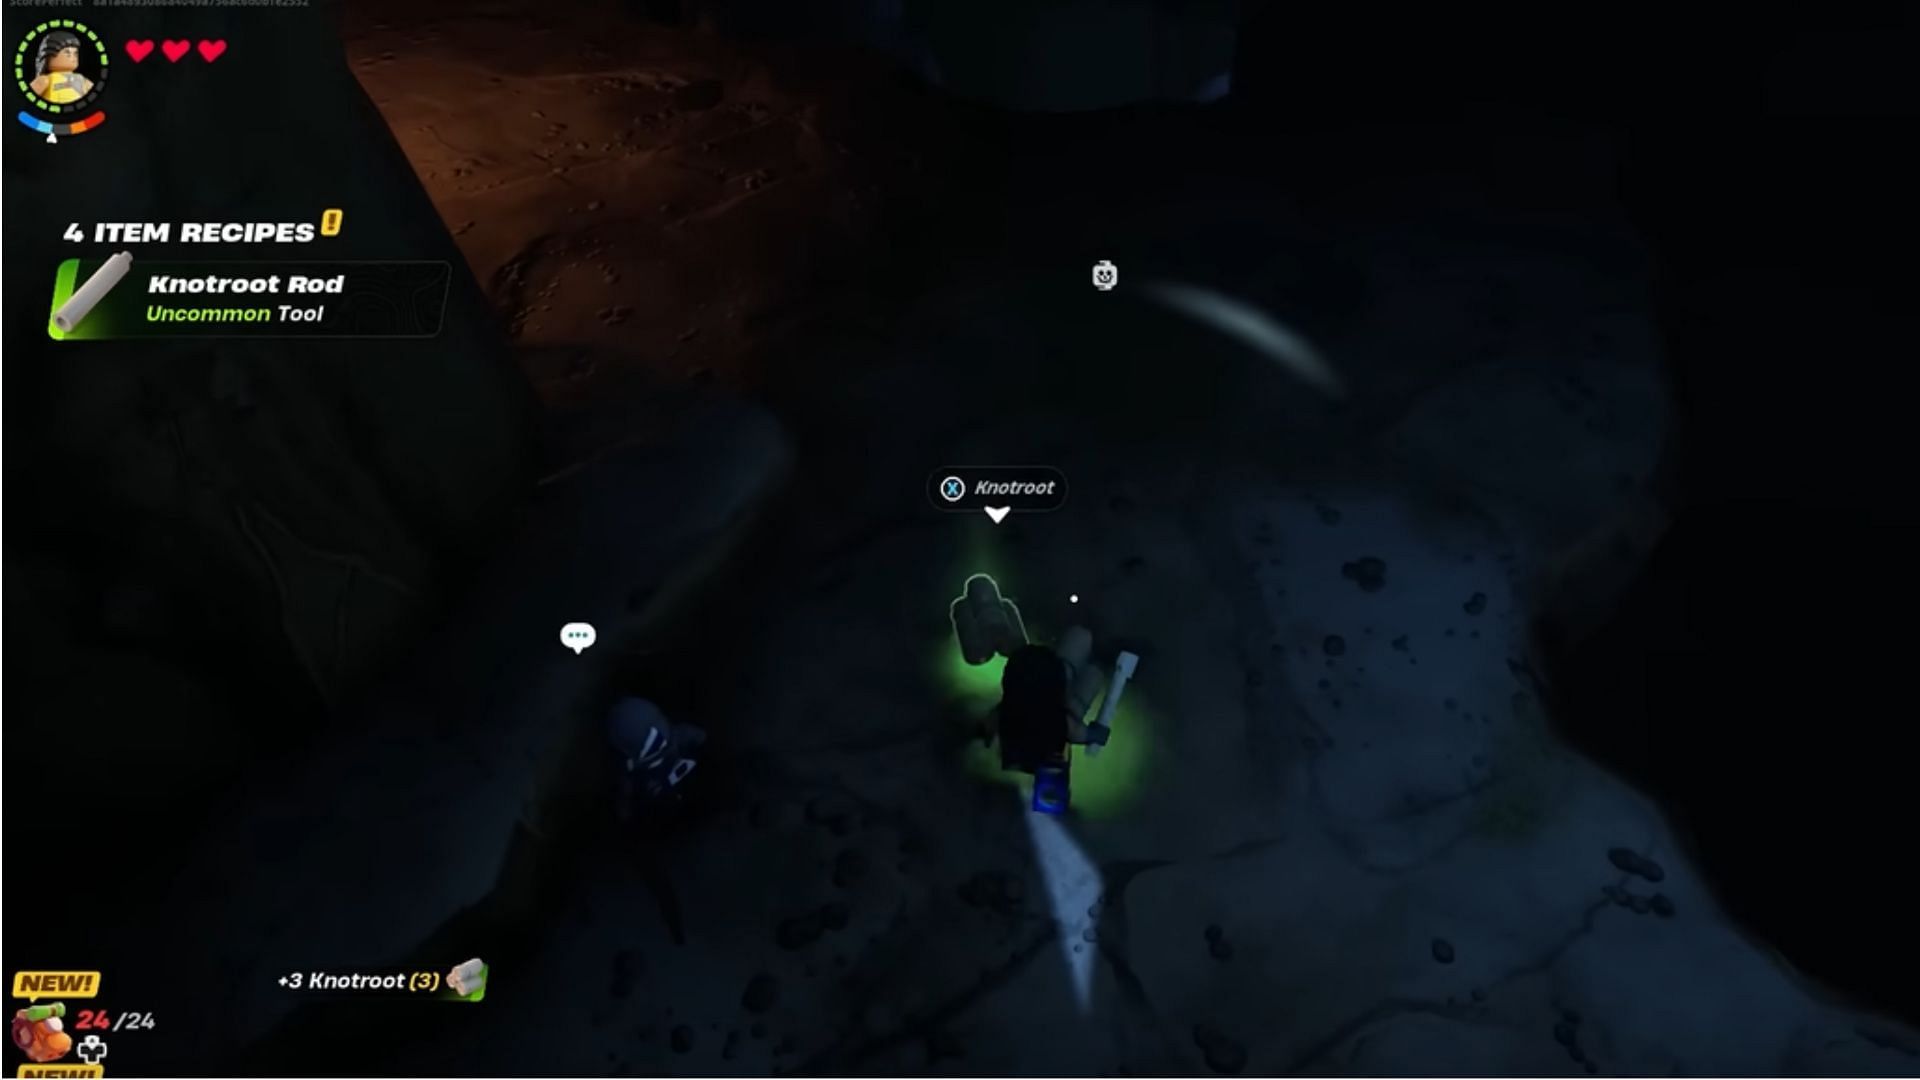 Inside the cave, search for nodes on the cave walls (Image via Epic Games)